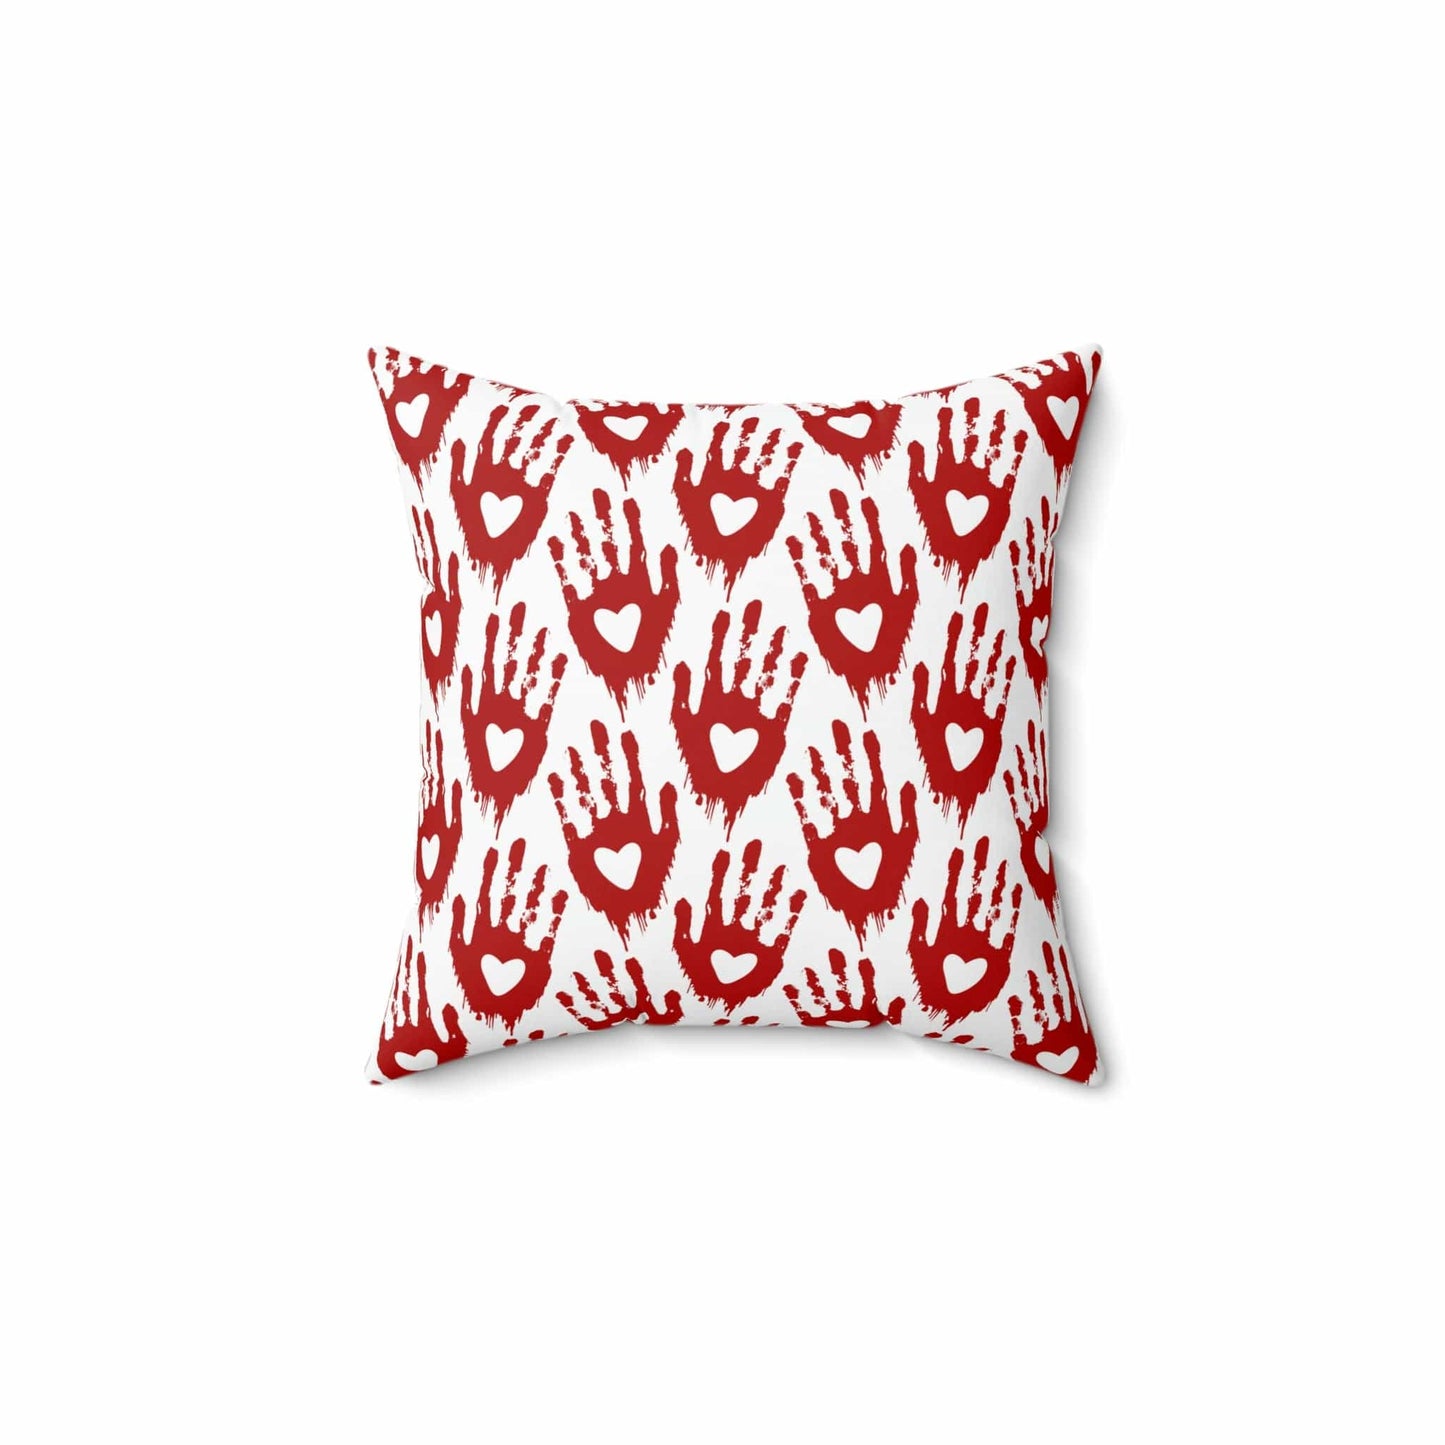 Kate McEnroe New York Halloween Pillow Case - Red Heart Hand Pattern Throw Pillow Covers 14" × 14" 3549431915